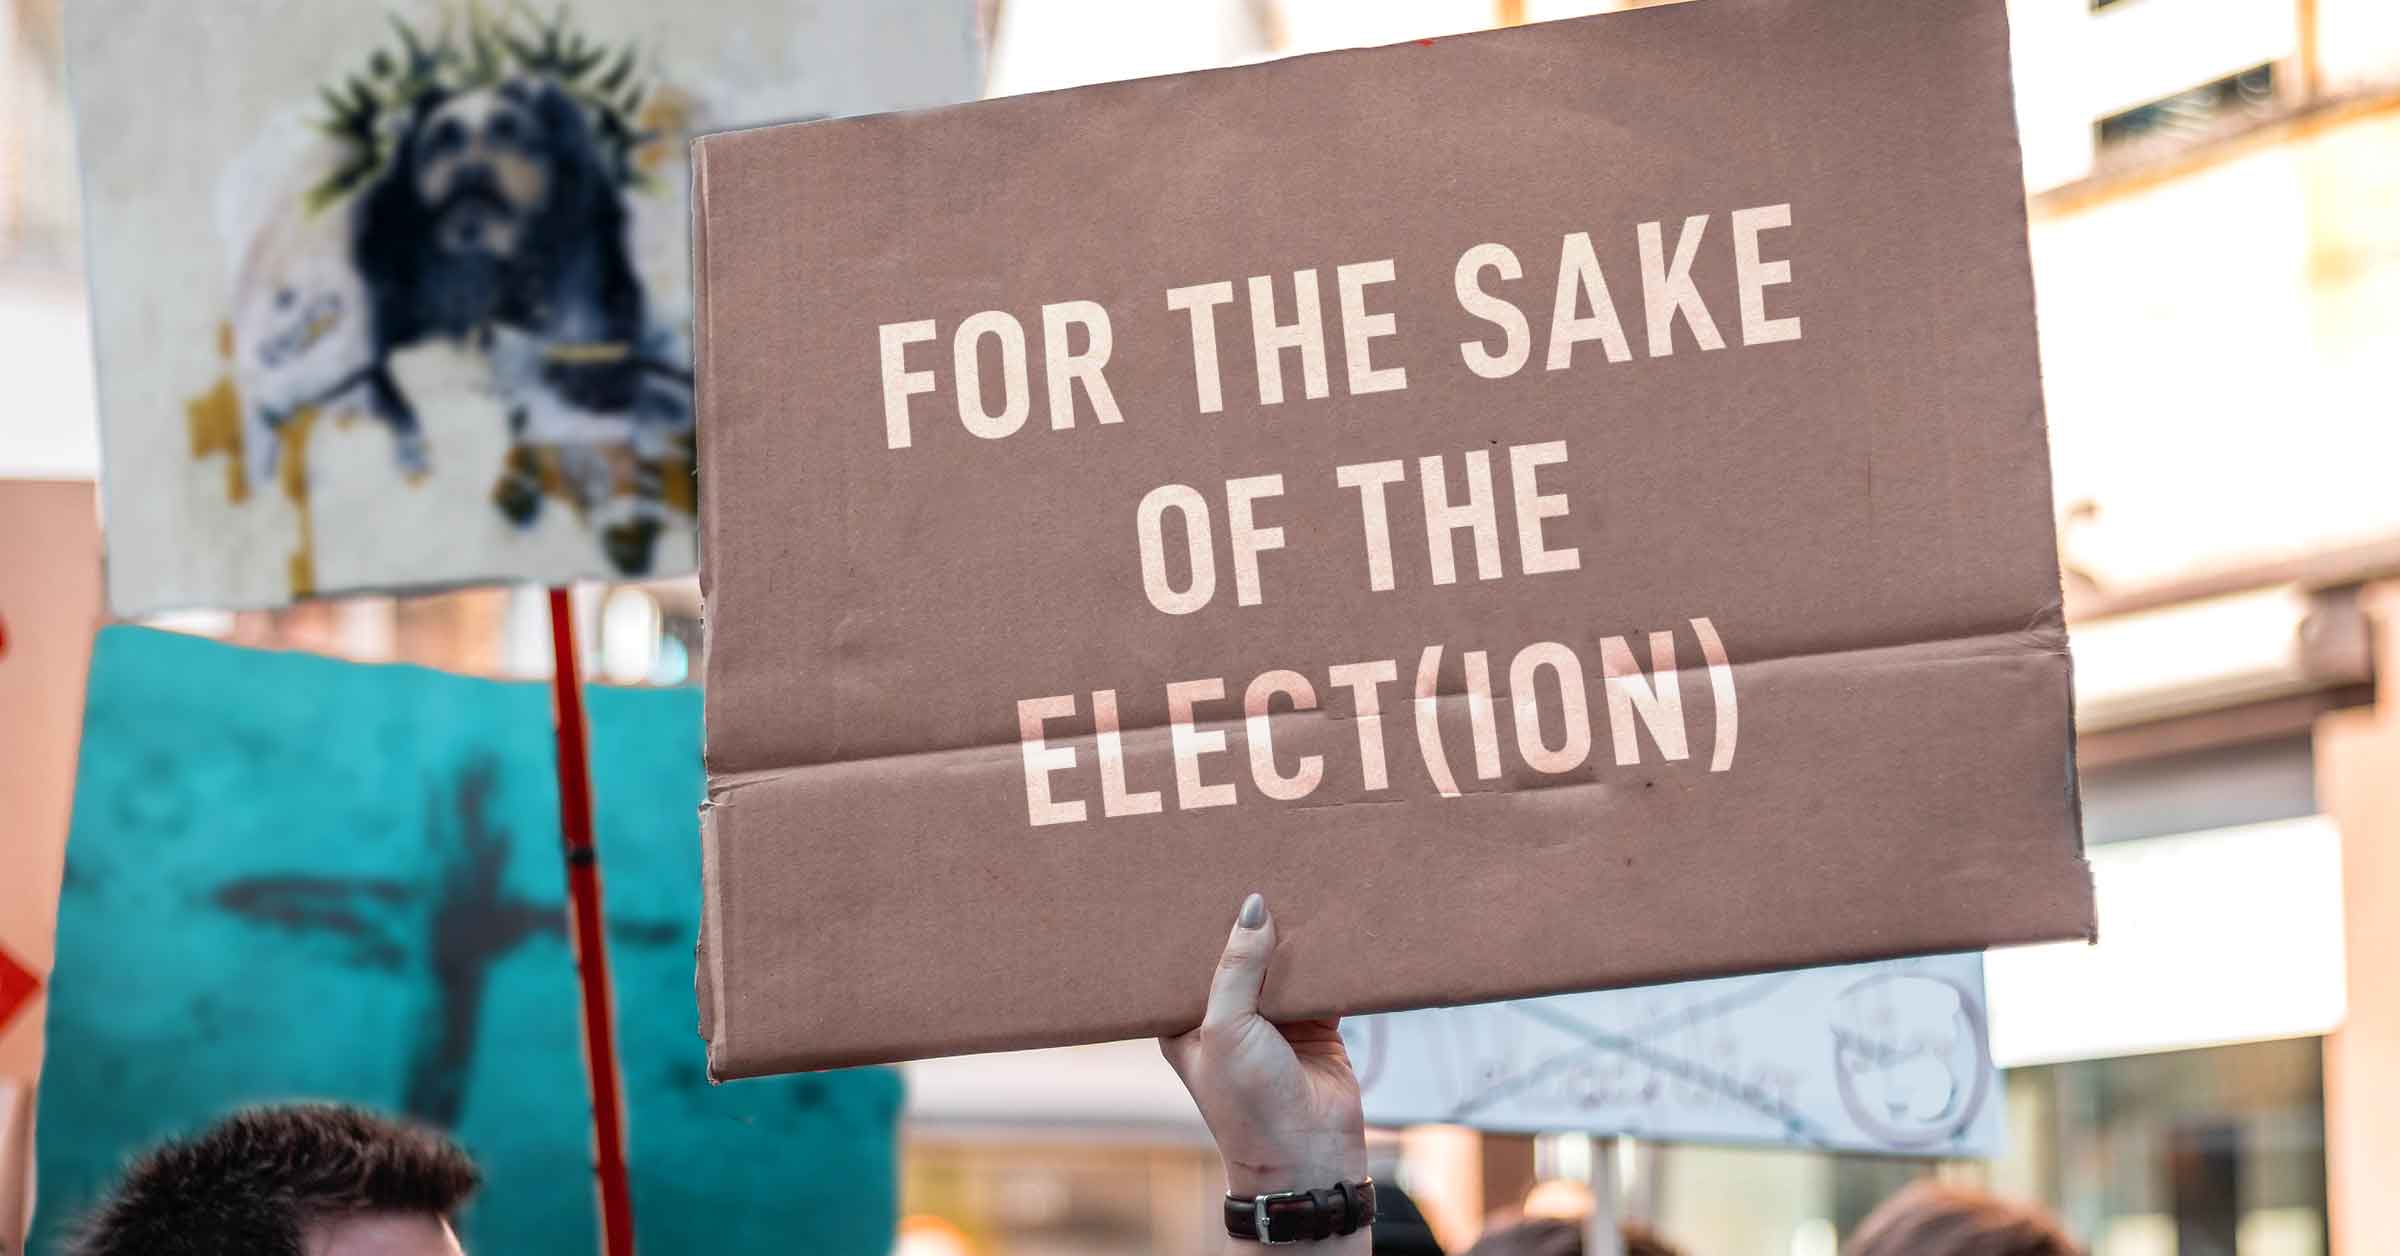 photo of person holding a sign that says "for the sake of the elect/election"